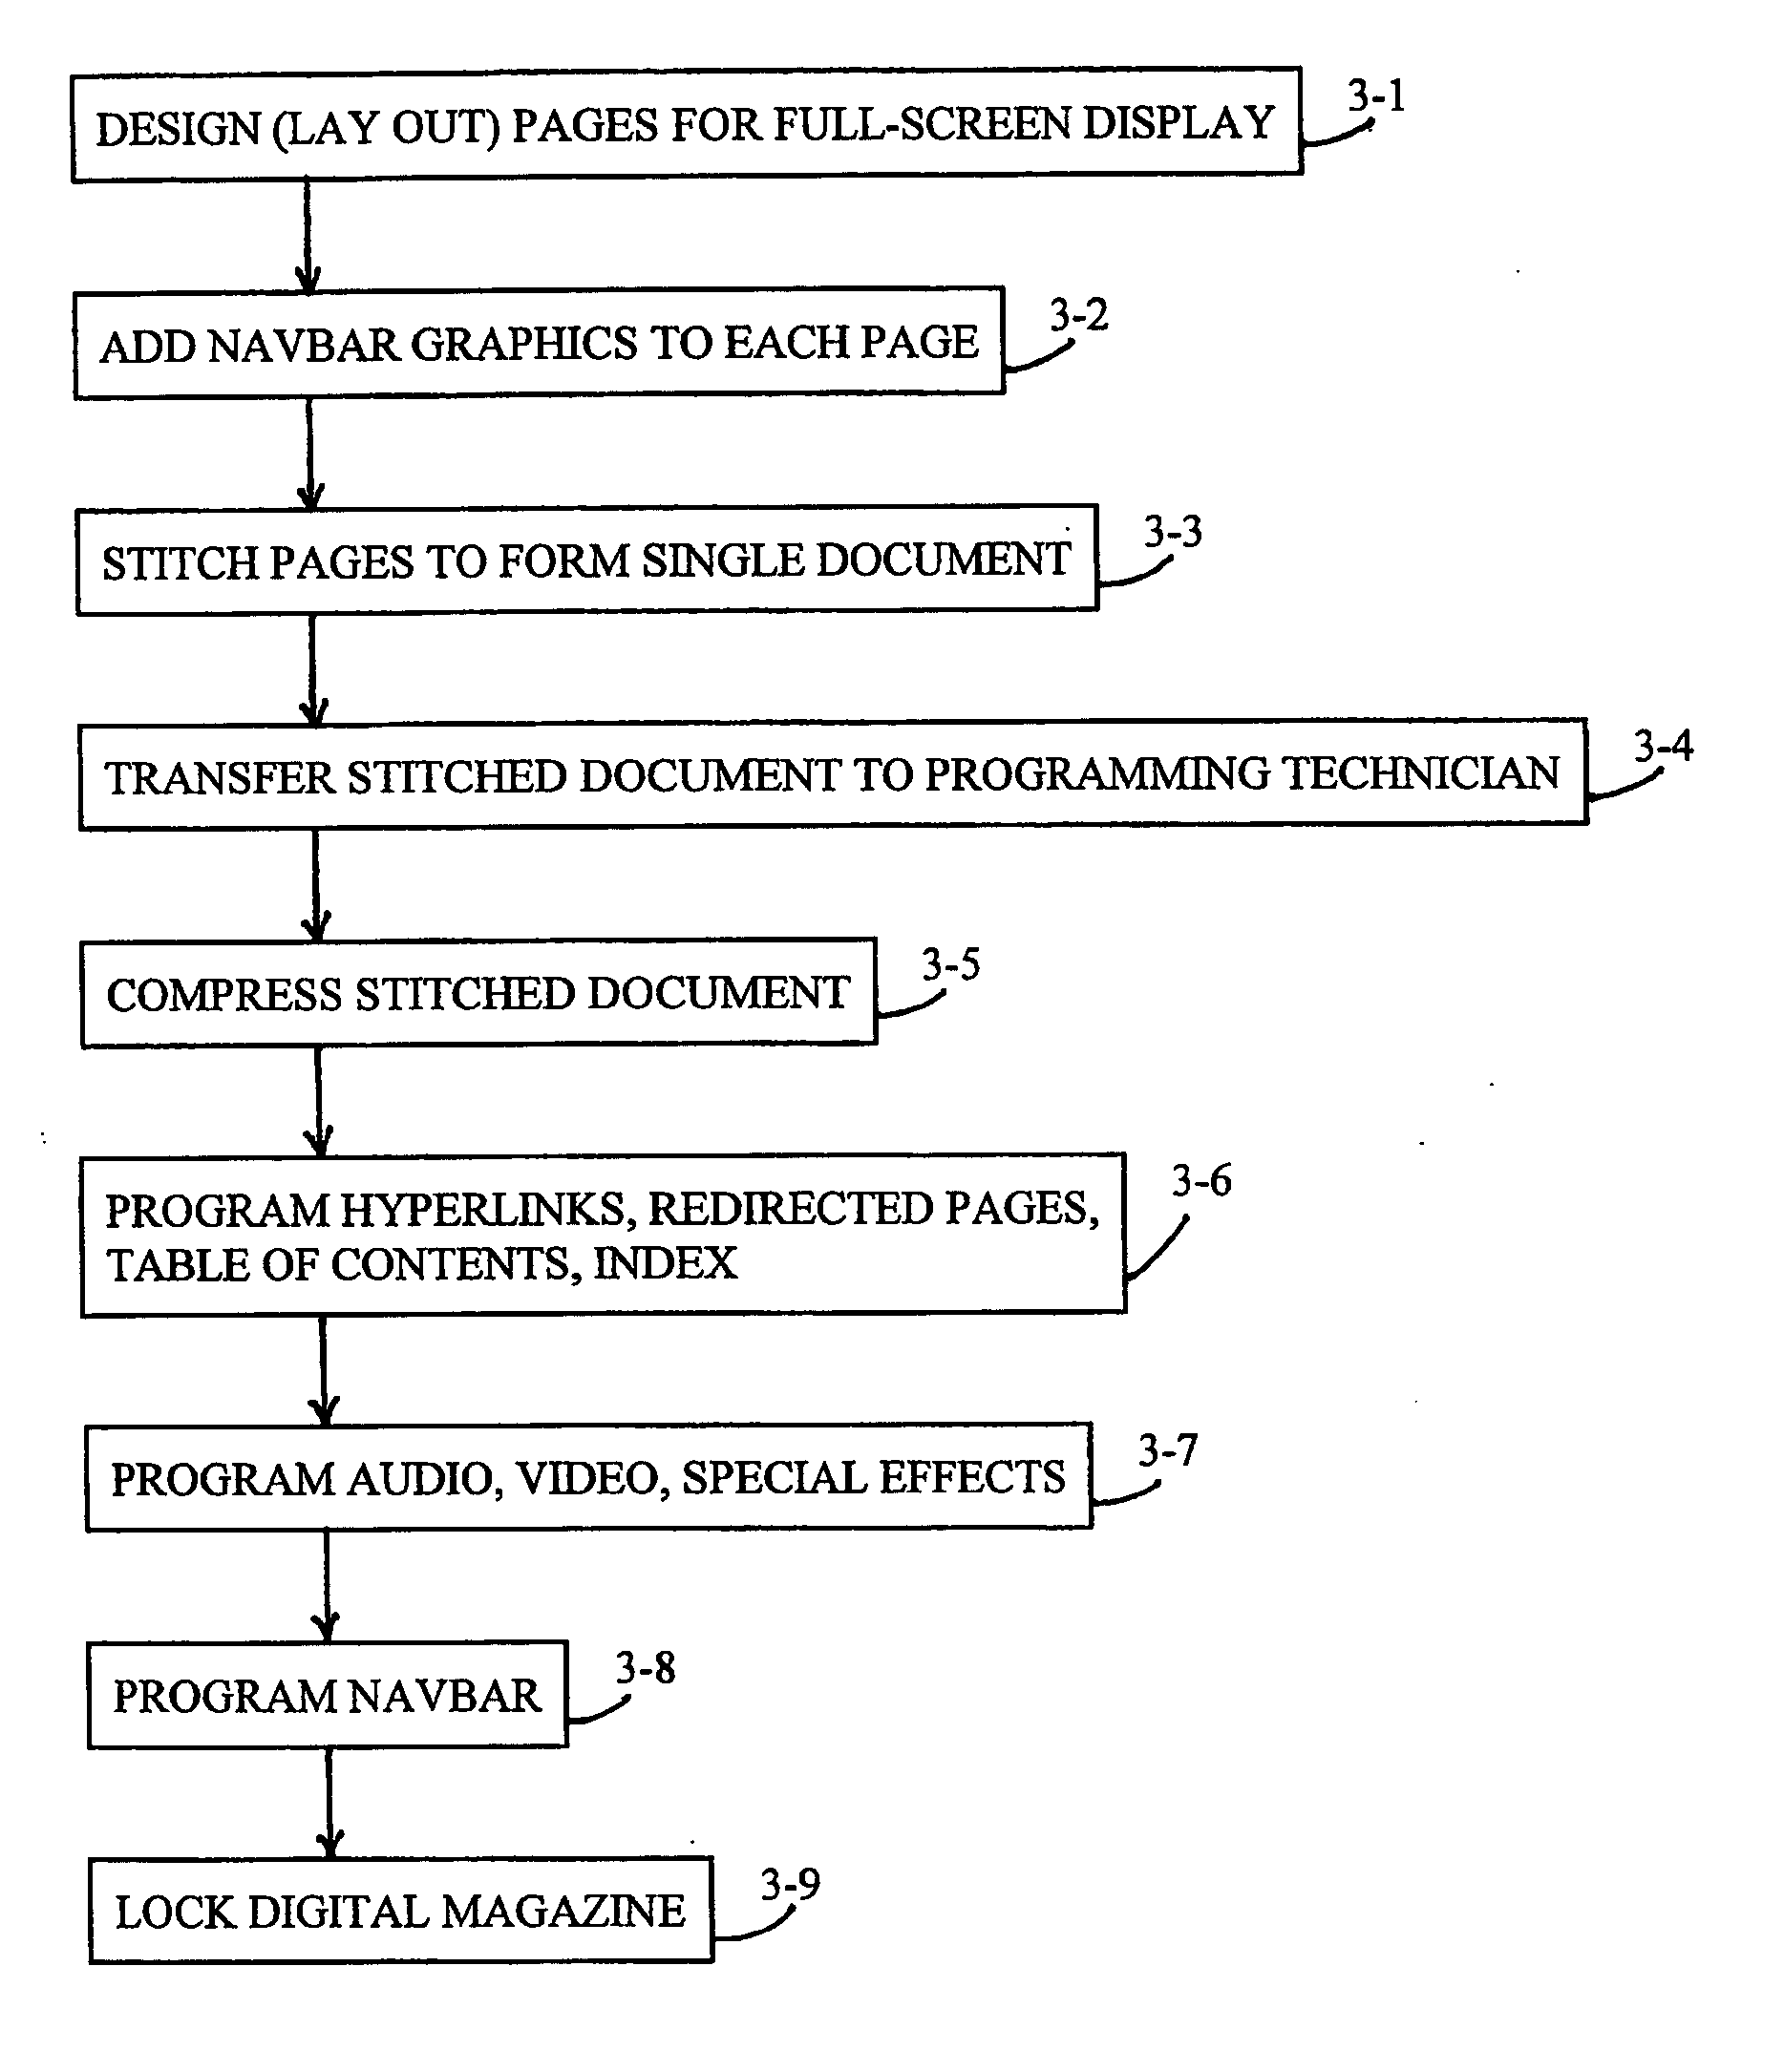 Method of producing and delivering an electronic magazine in full-screen format